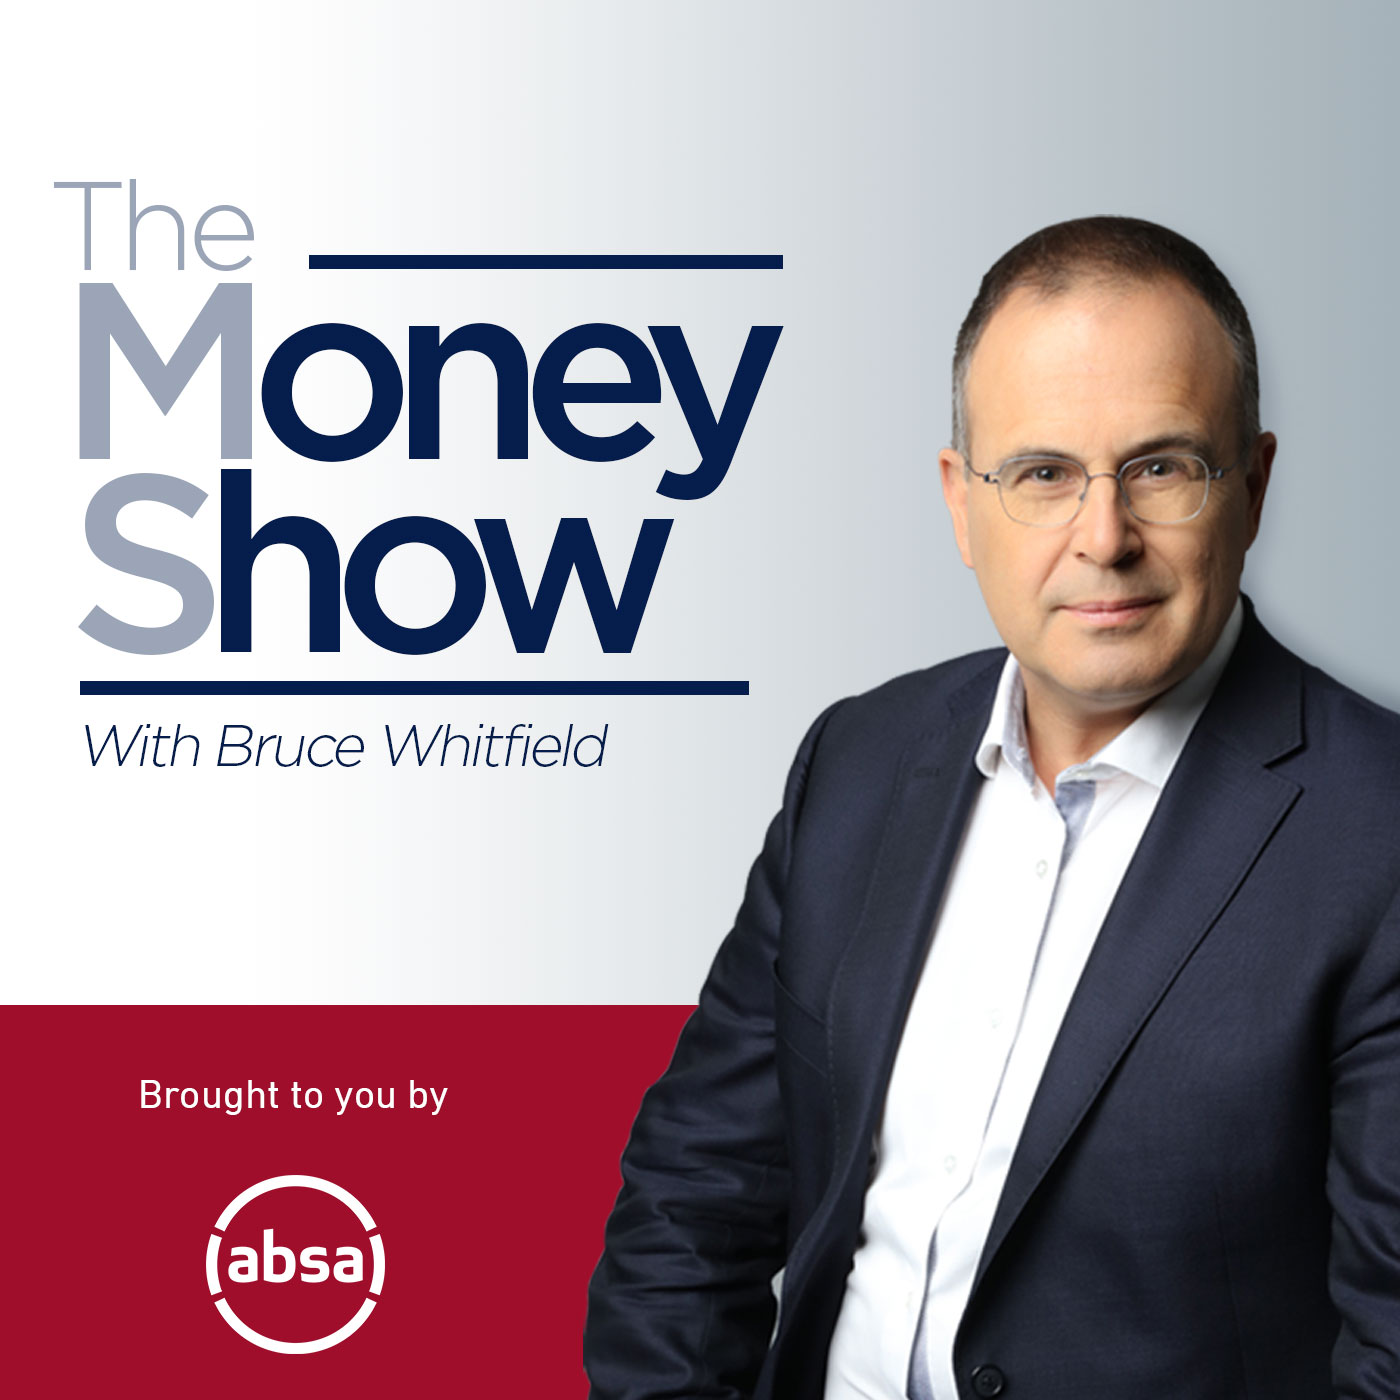 The Money Show Explainer: What is greylisting and why it matters?